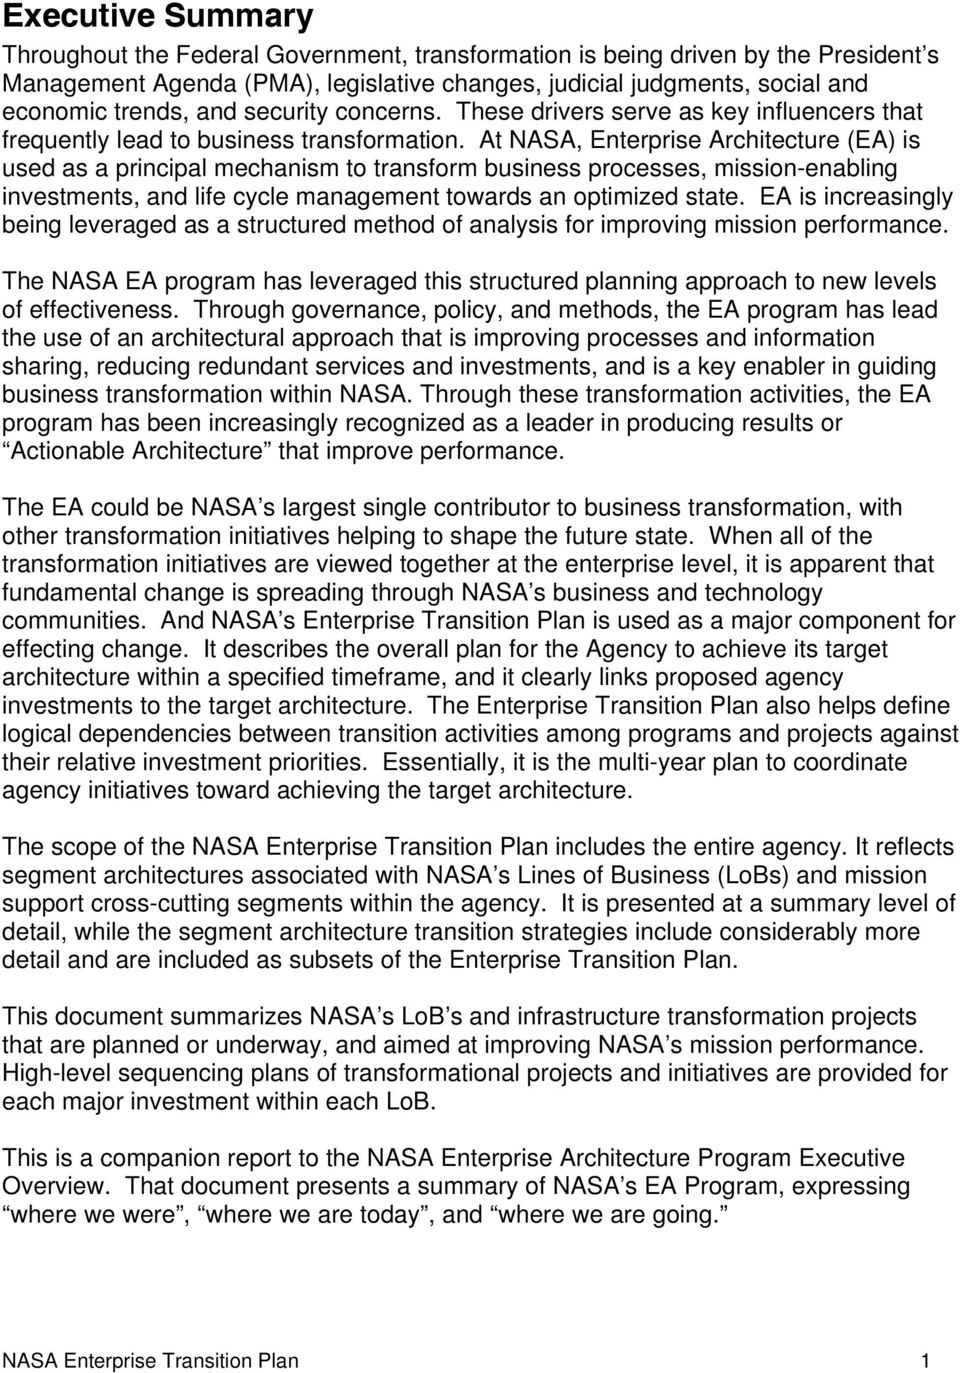 At NASA, Enterprise Architecture (EA) is used as a principal mechanism to transform business processes, mission-enabling investments, and life cycle management towards an optimized state.